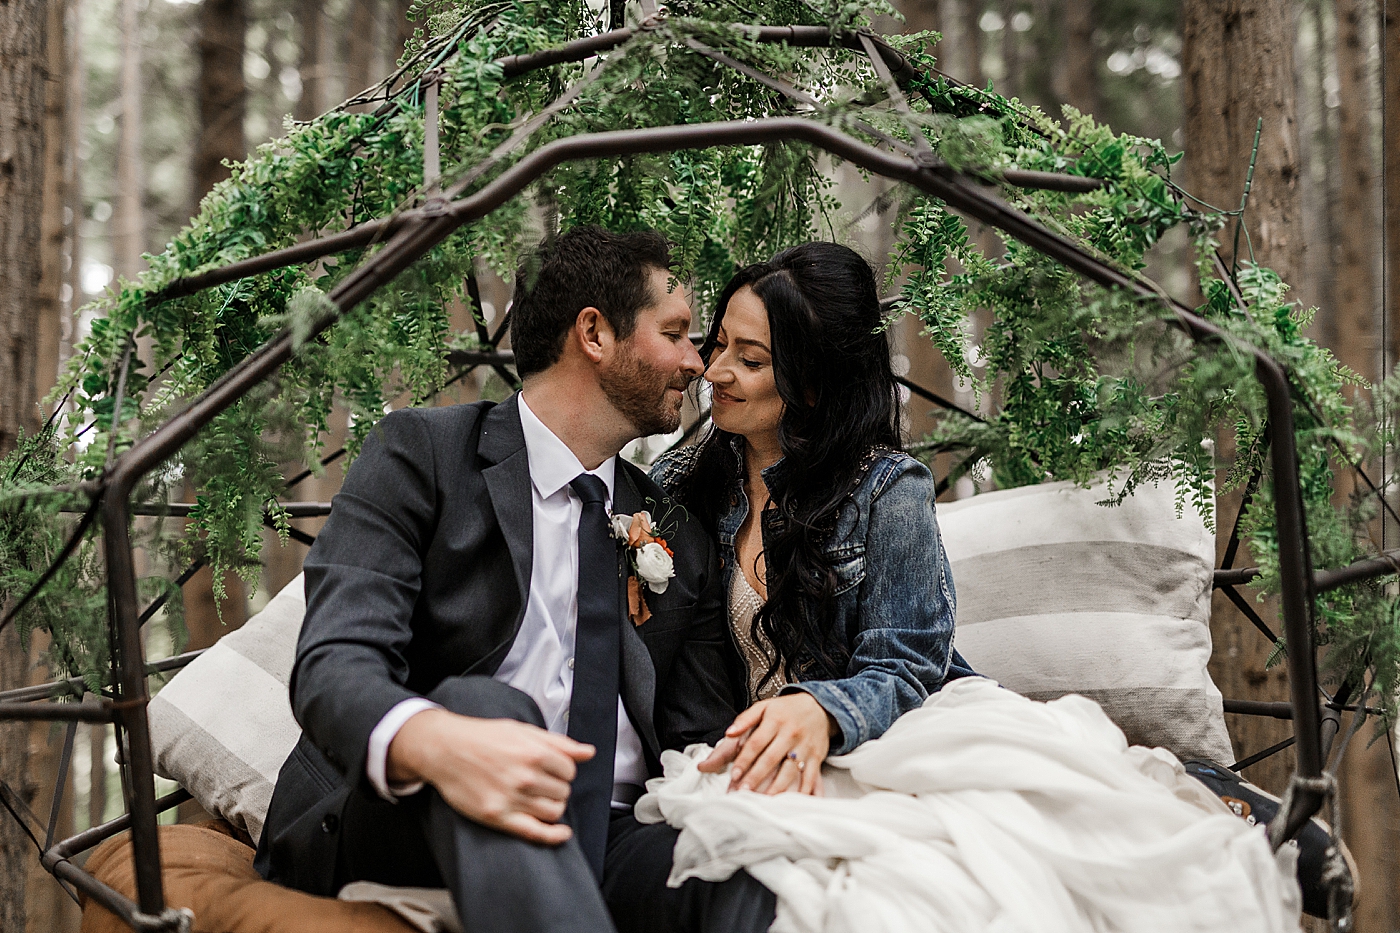 PNW Treehouse Wedding and Elopement Venue | Emerald Forest | Megan Montalvo Photography